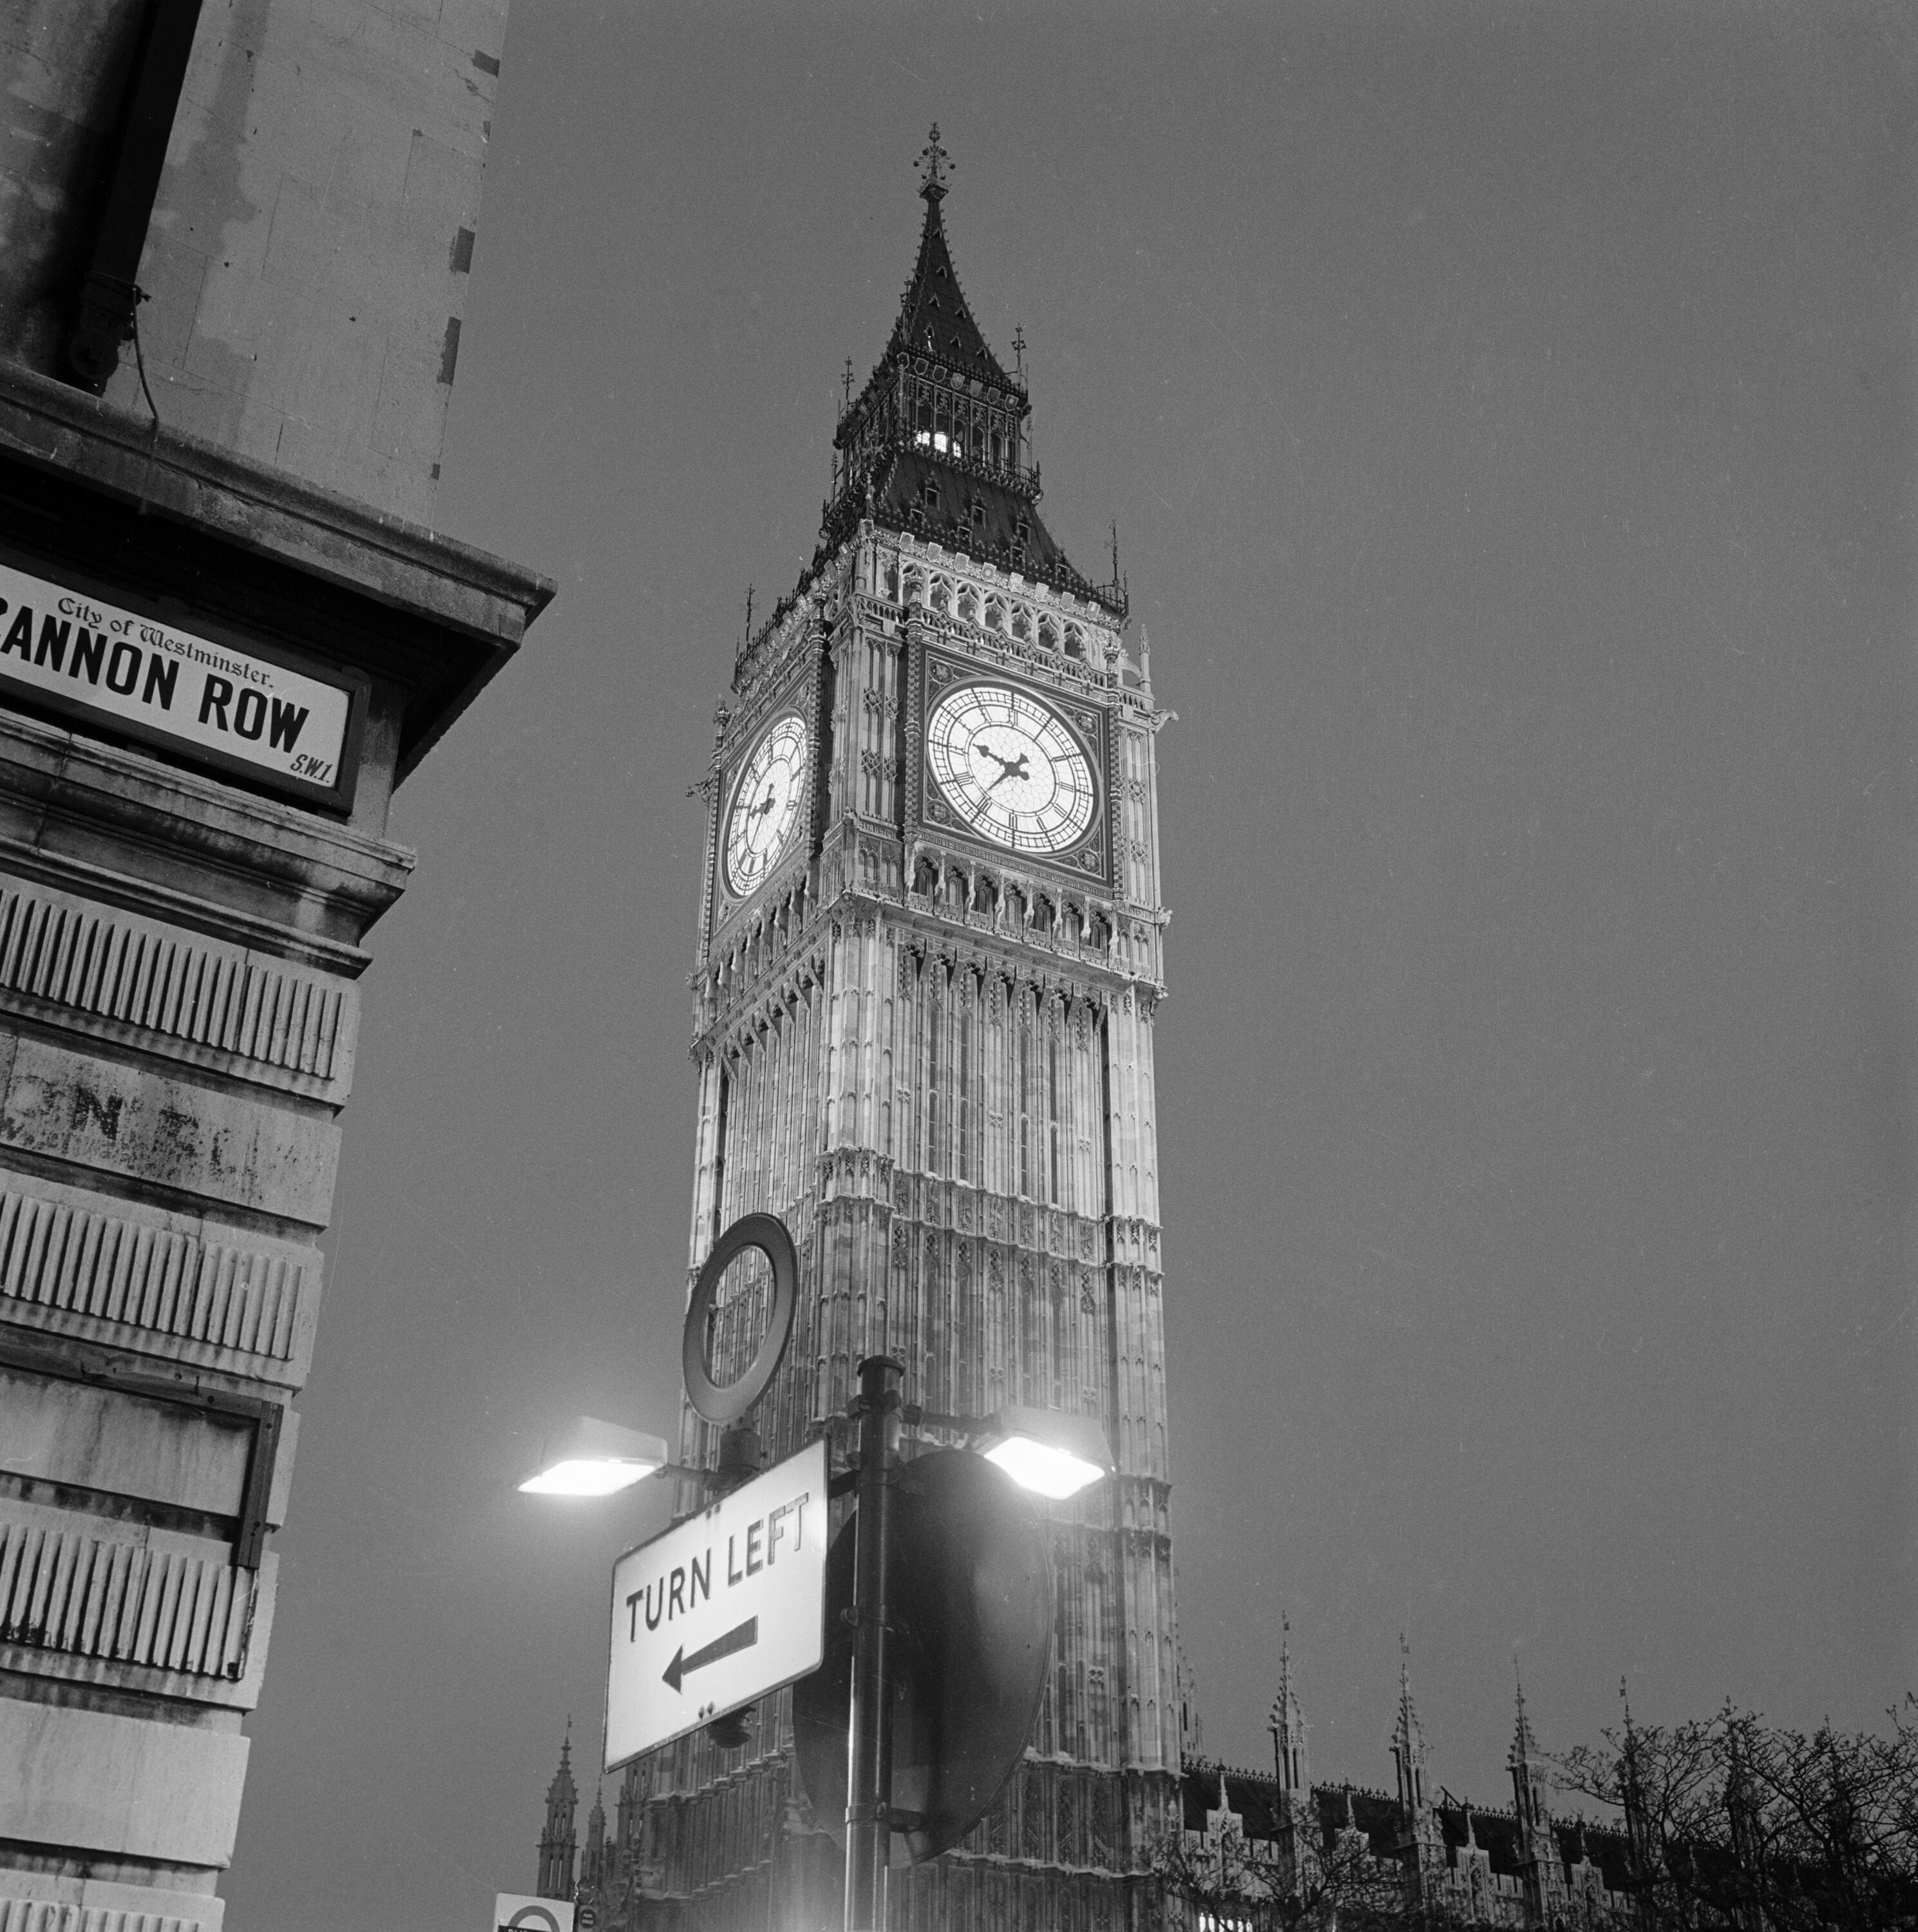 Black and white photo of Big Ben from the corner of Cannon Row